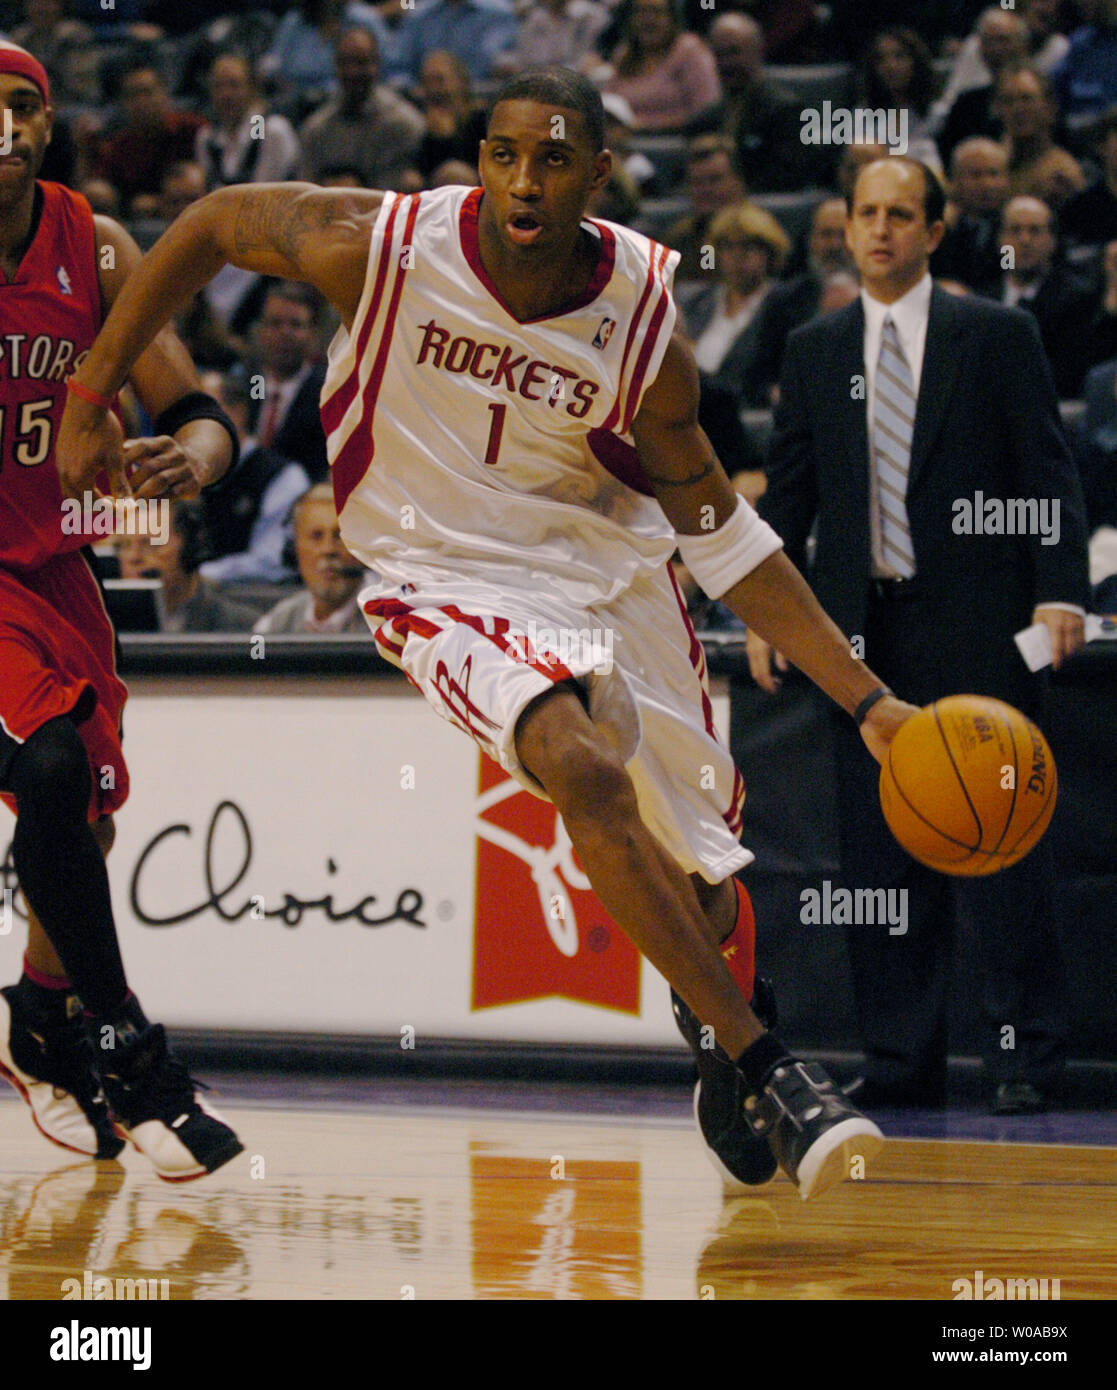 Houston Rockets' Tracy McGrady drives the ball past Toronto Raptors' Vince Carter during first quarter action in the Raptors' home opener at the Air Canada Center November 3, 2004 in Toronto, Canada. The Raptors went on to defeat the Rockets 95-88. (UPI Photo/Christine Chew) Stock Photo